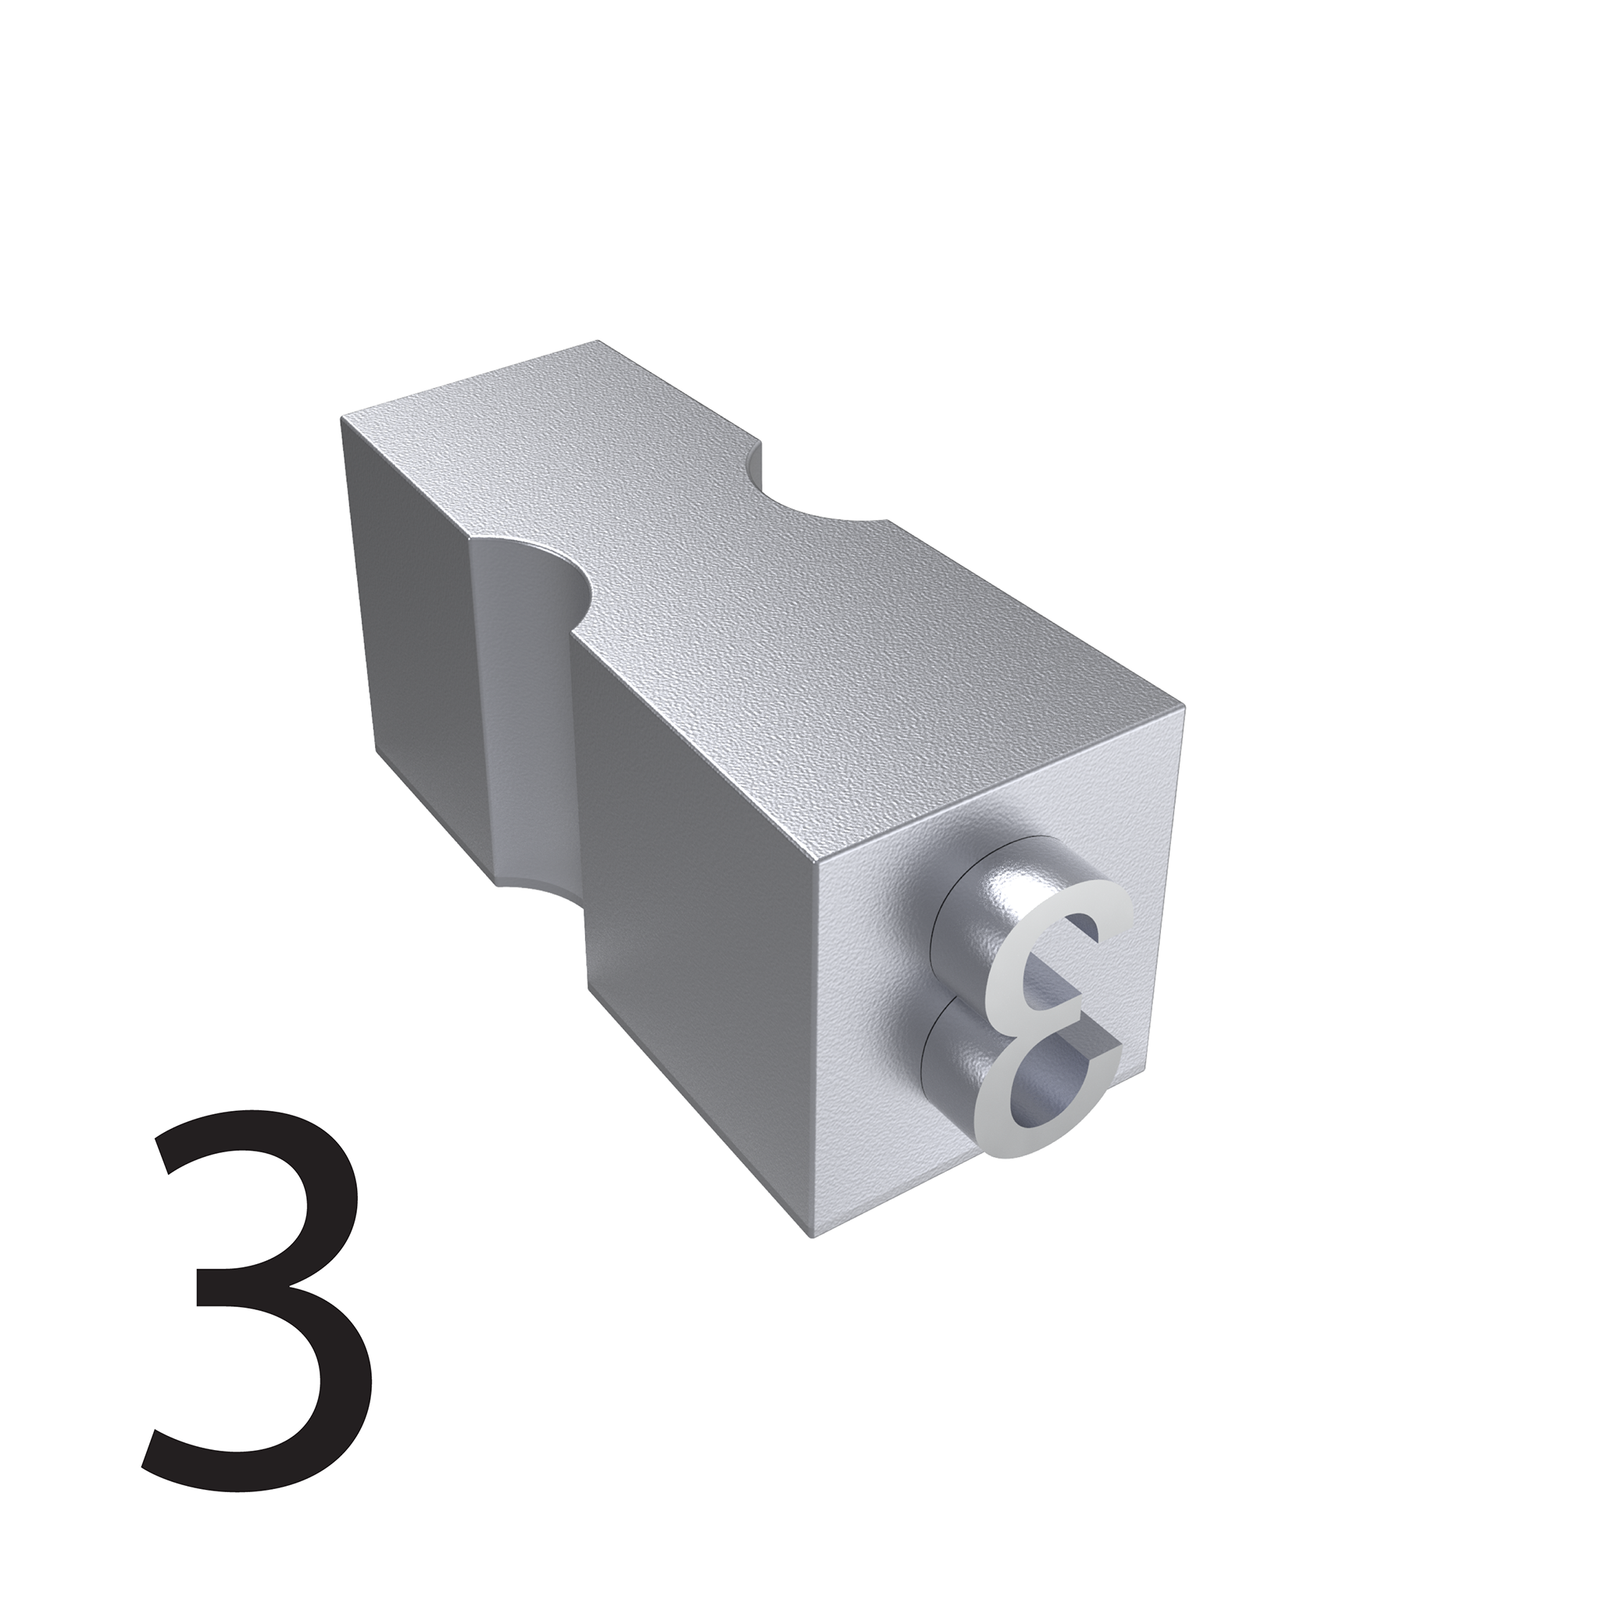 Type of number 3 for hot roll printers